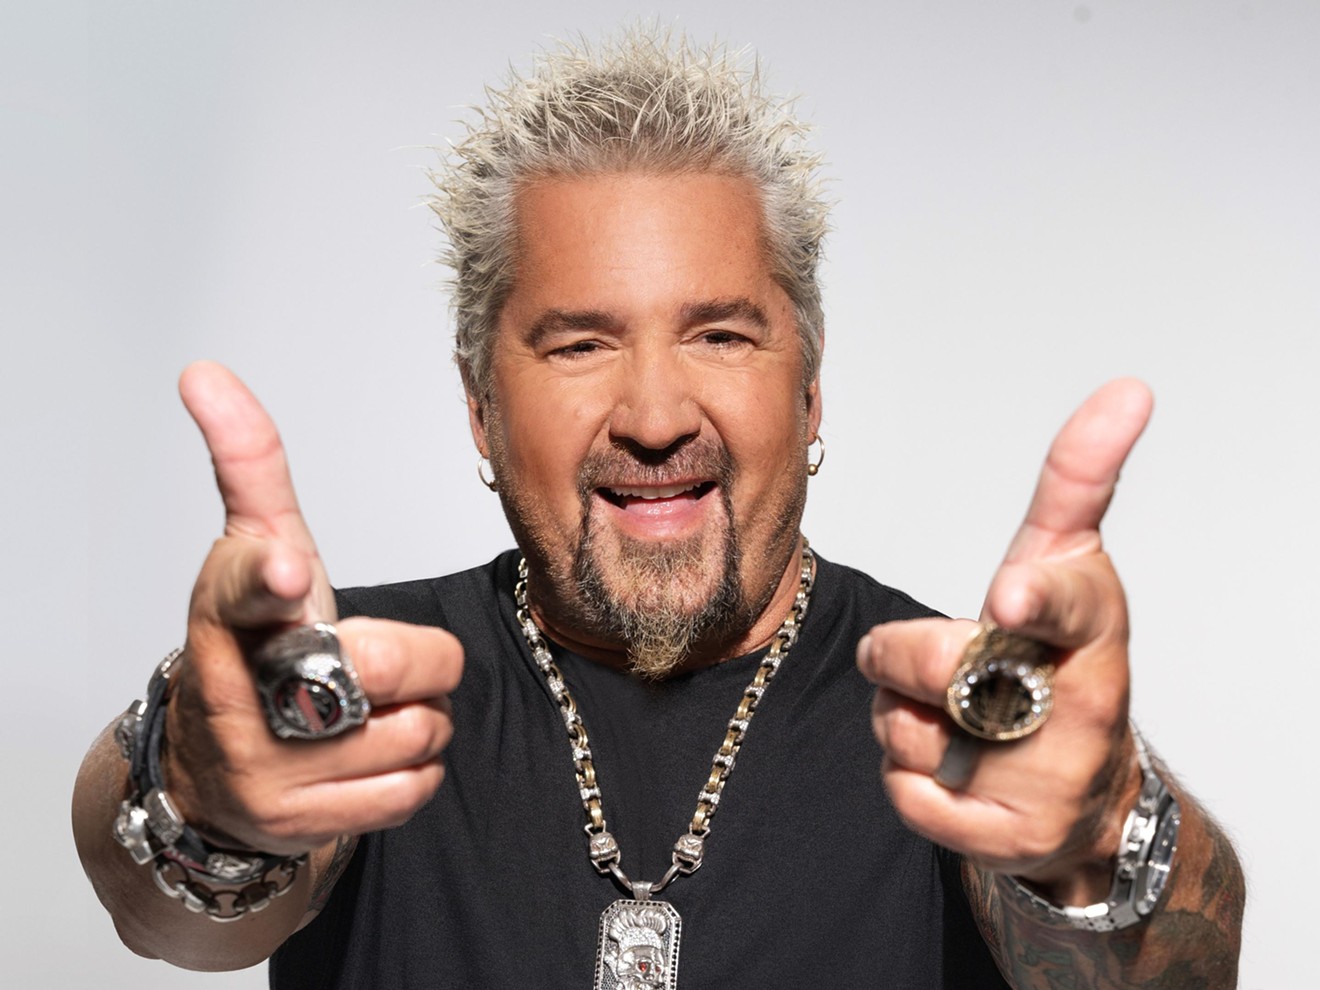 Guy Fieri is a fan of Phoenix. This weekend, he's featuring Valley eateries on his show and visiting for a meet-and-greet.